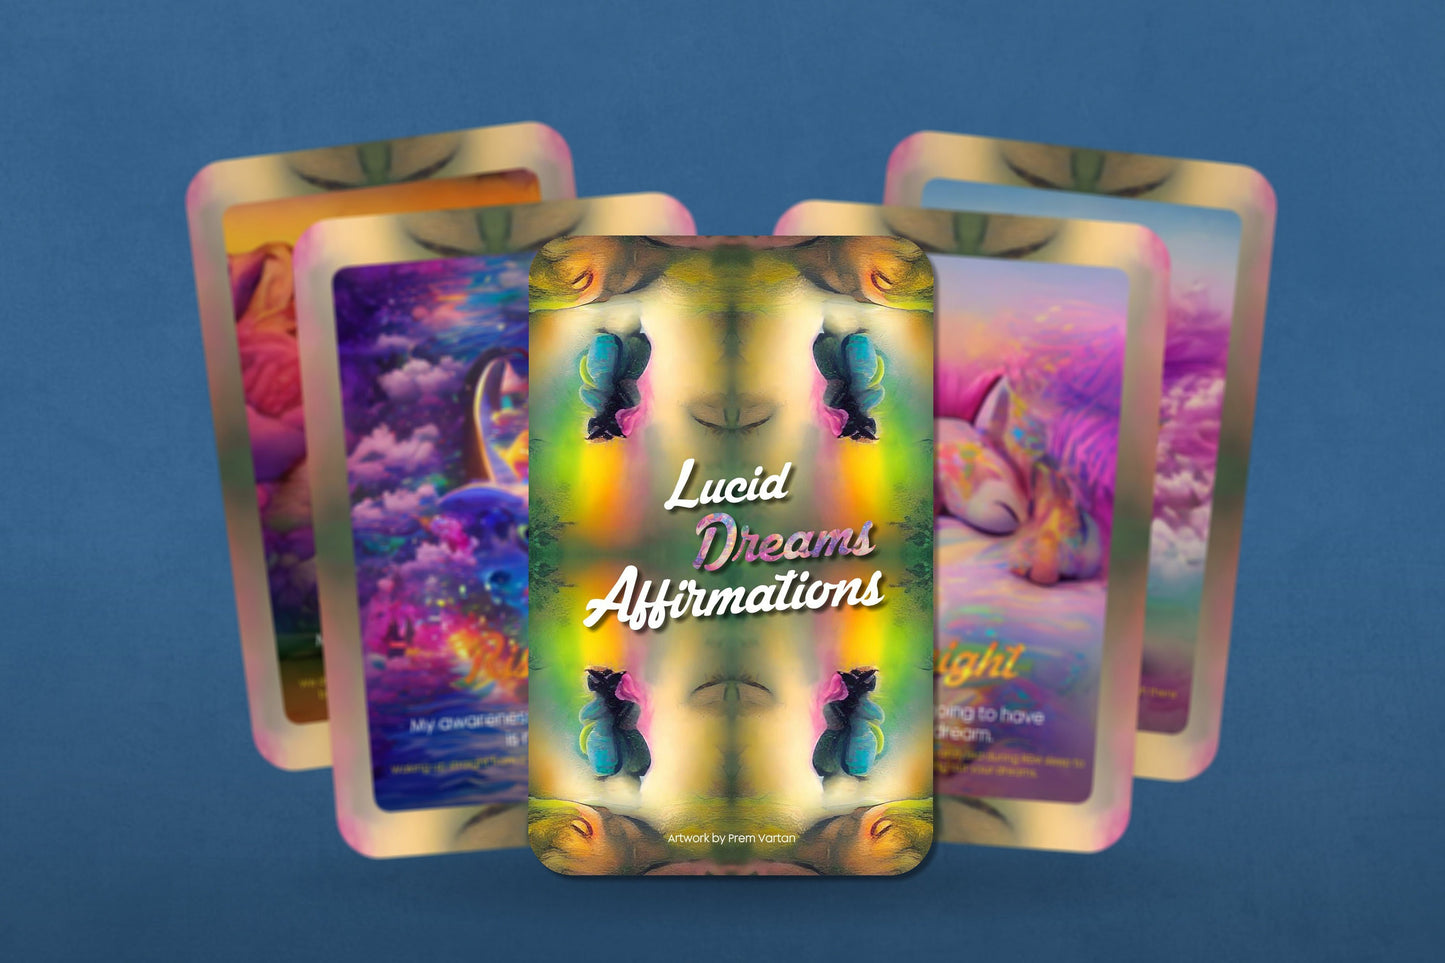 Lucid Dreams Affirmations - Wisdom Cards for Lucid Dreams